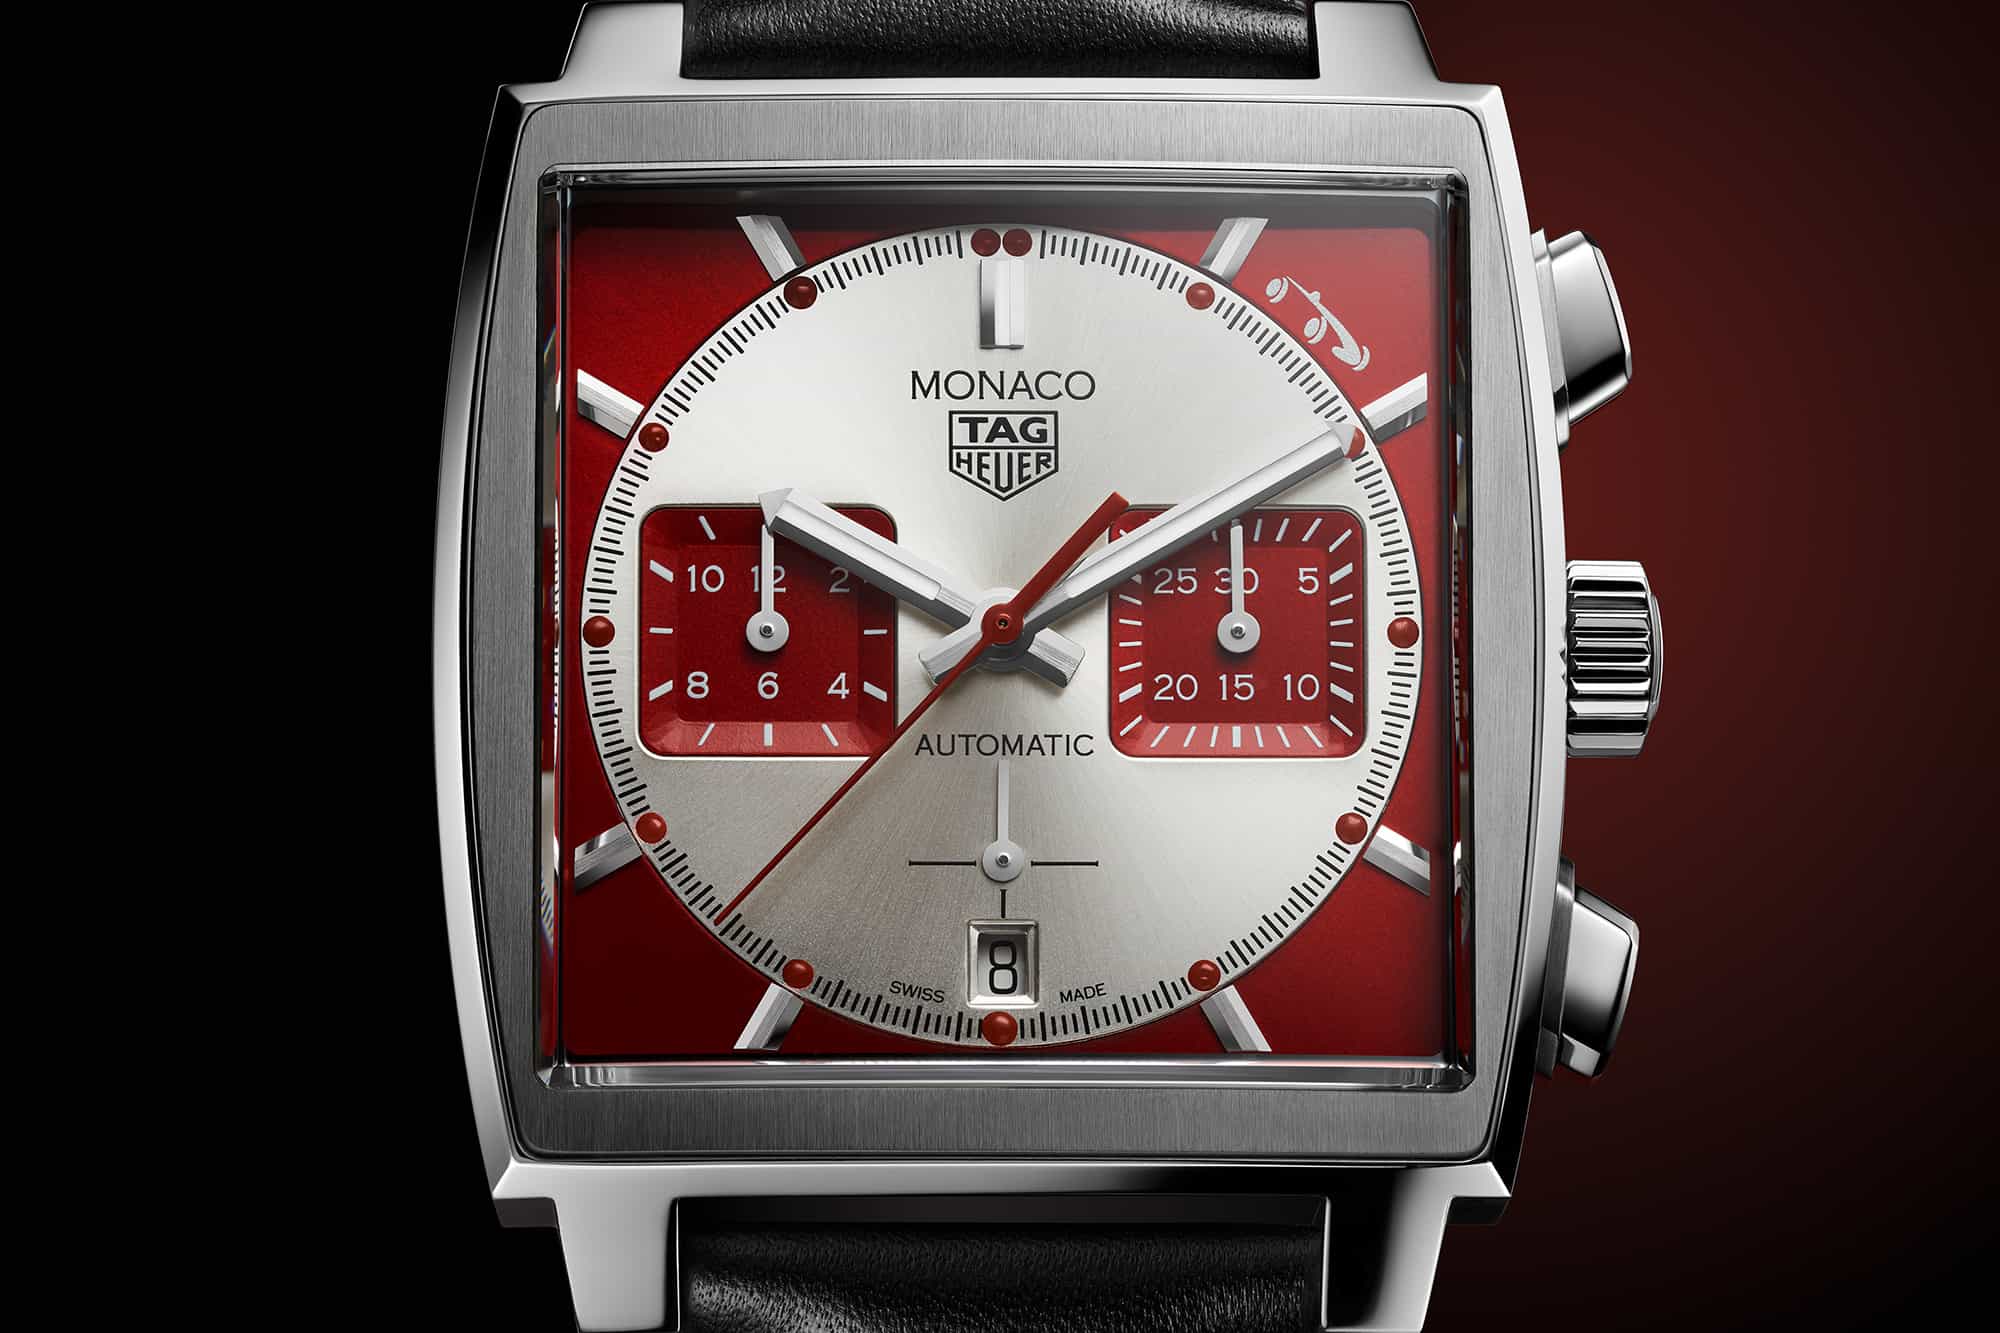 TAG Heuer Pays Tribute to Classic Racing with a New Limited Edition Monaco